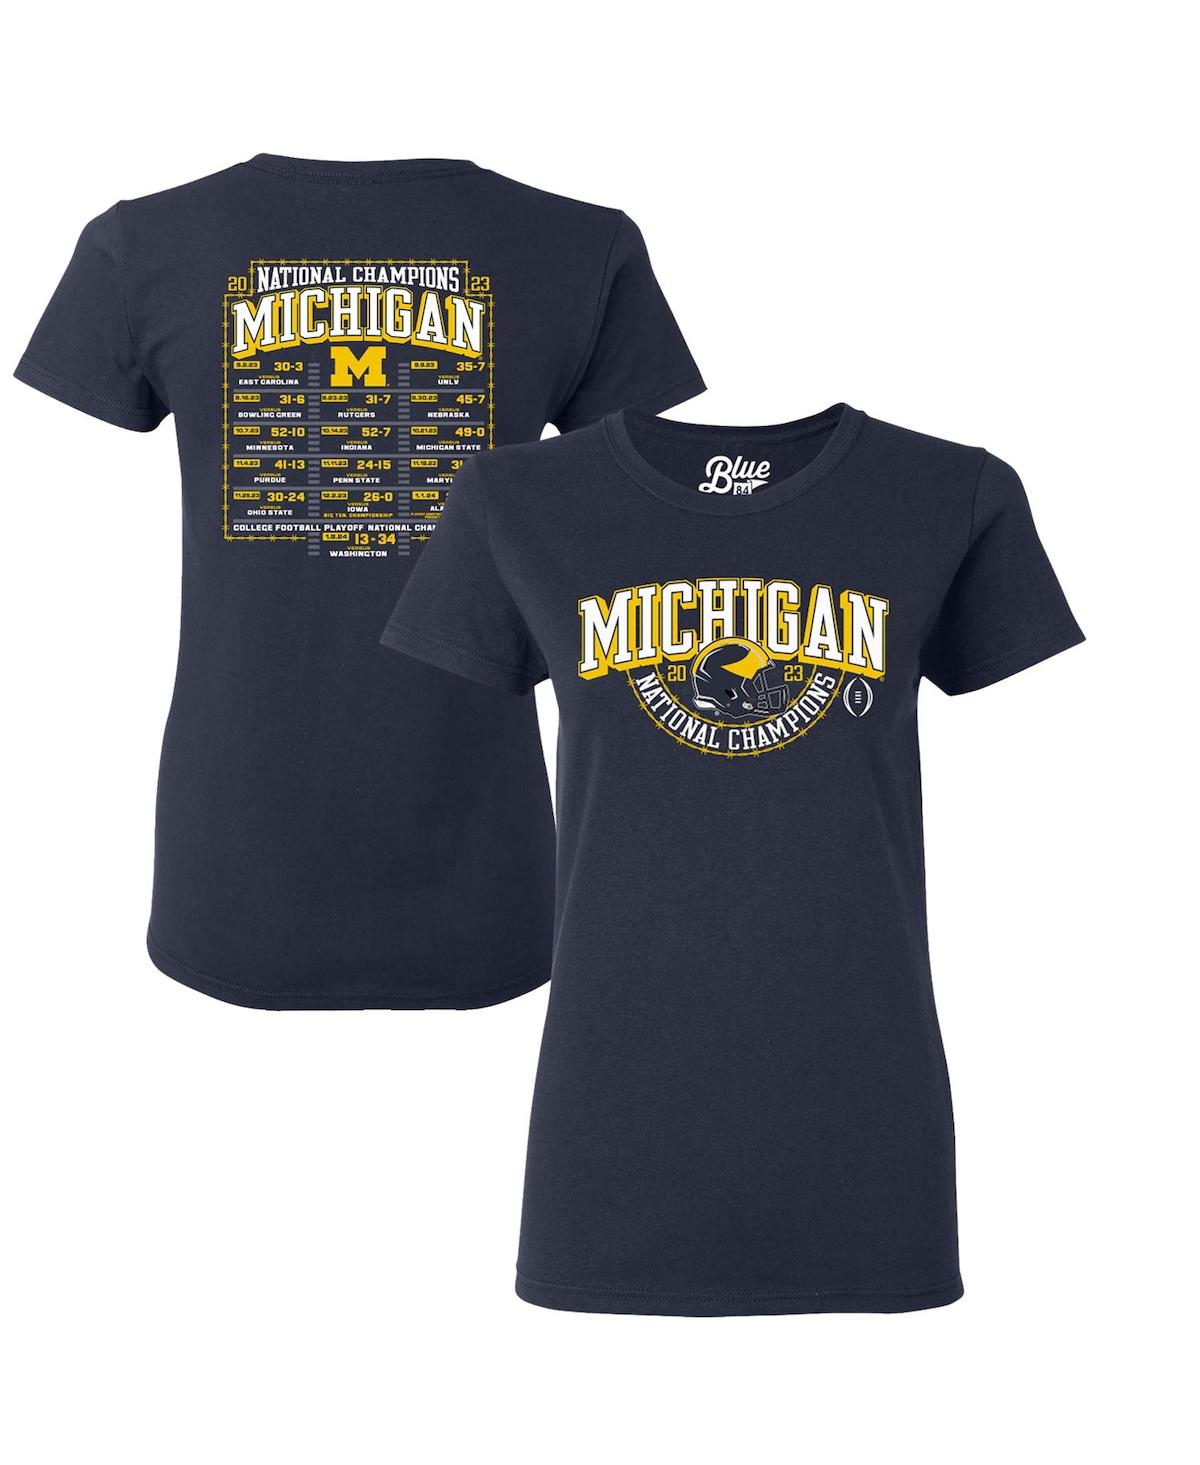 Women's Blue 84 Navy Michigan Wolverines College Football Playoff 2023 National Champions Gold Dust Schedule T-shirt - Navy